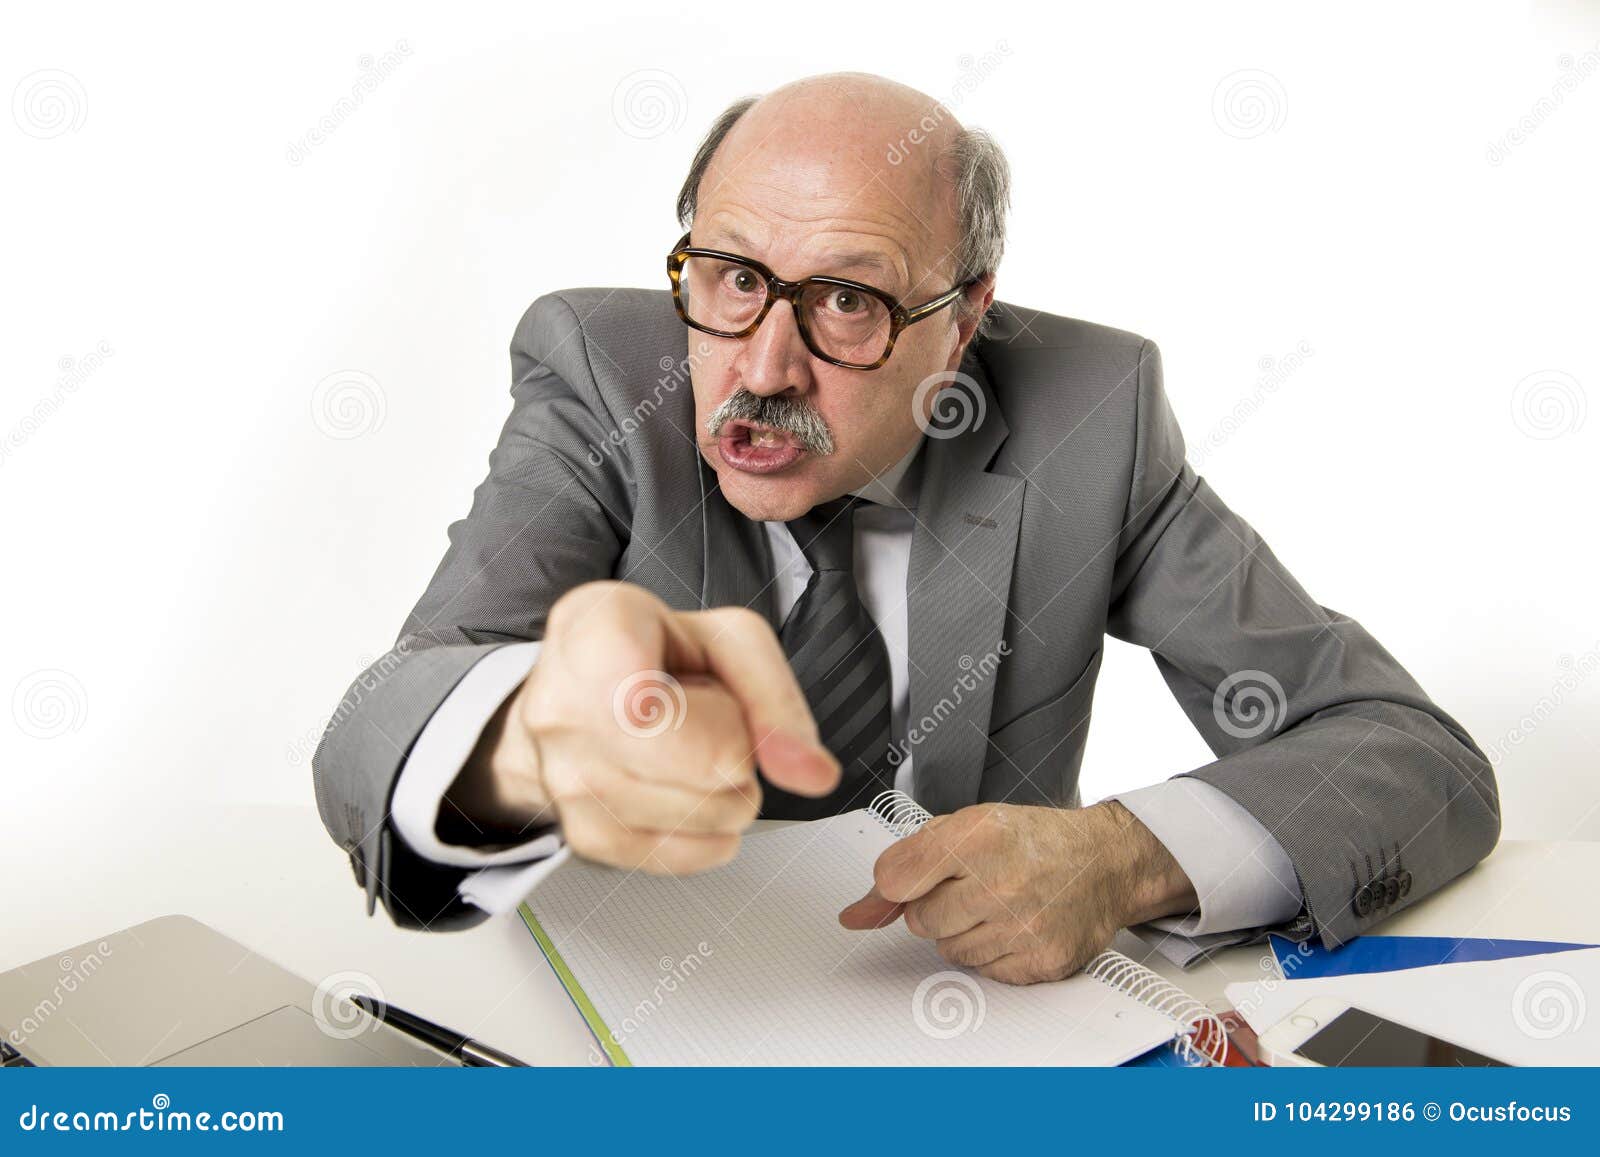 60s Bald Senior Office Boss Man Furious and Angry Gesturing Upset and Mad  Sitting on Desk with Paperwork in Business and Job Prob Stock Photo - Image  of executive, face: 104299186